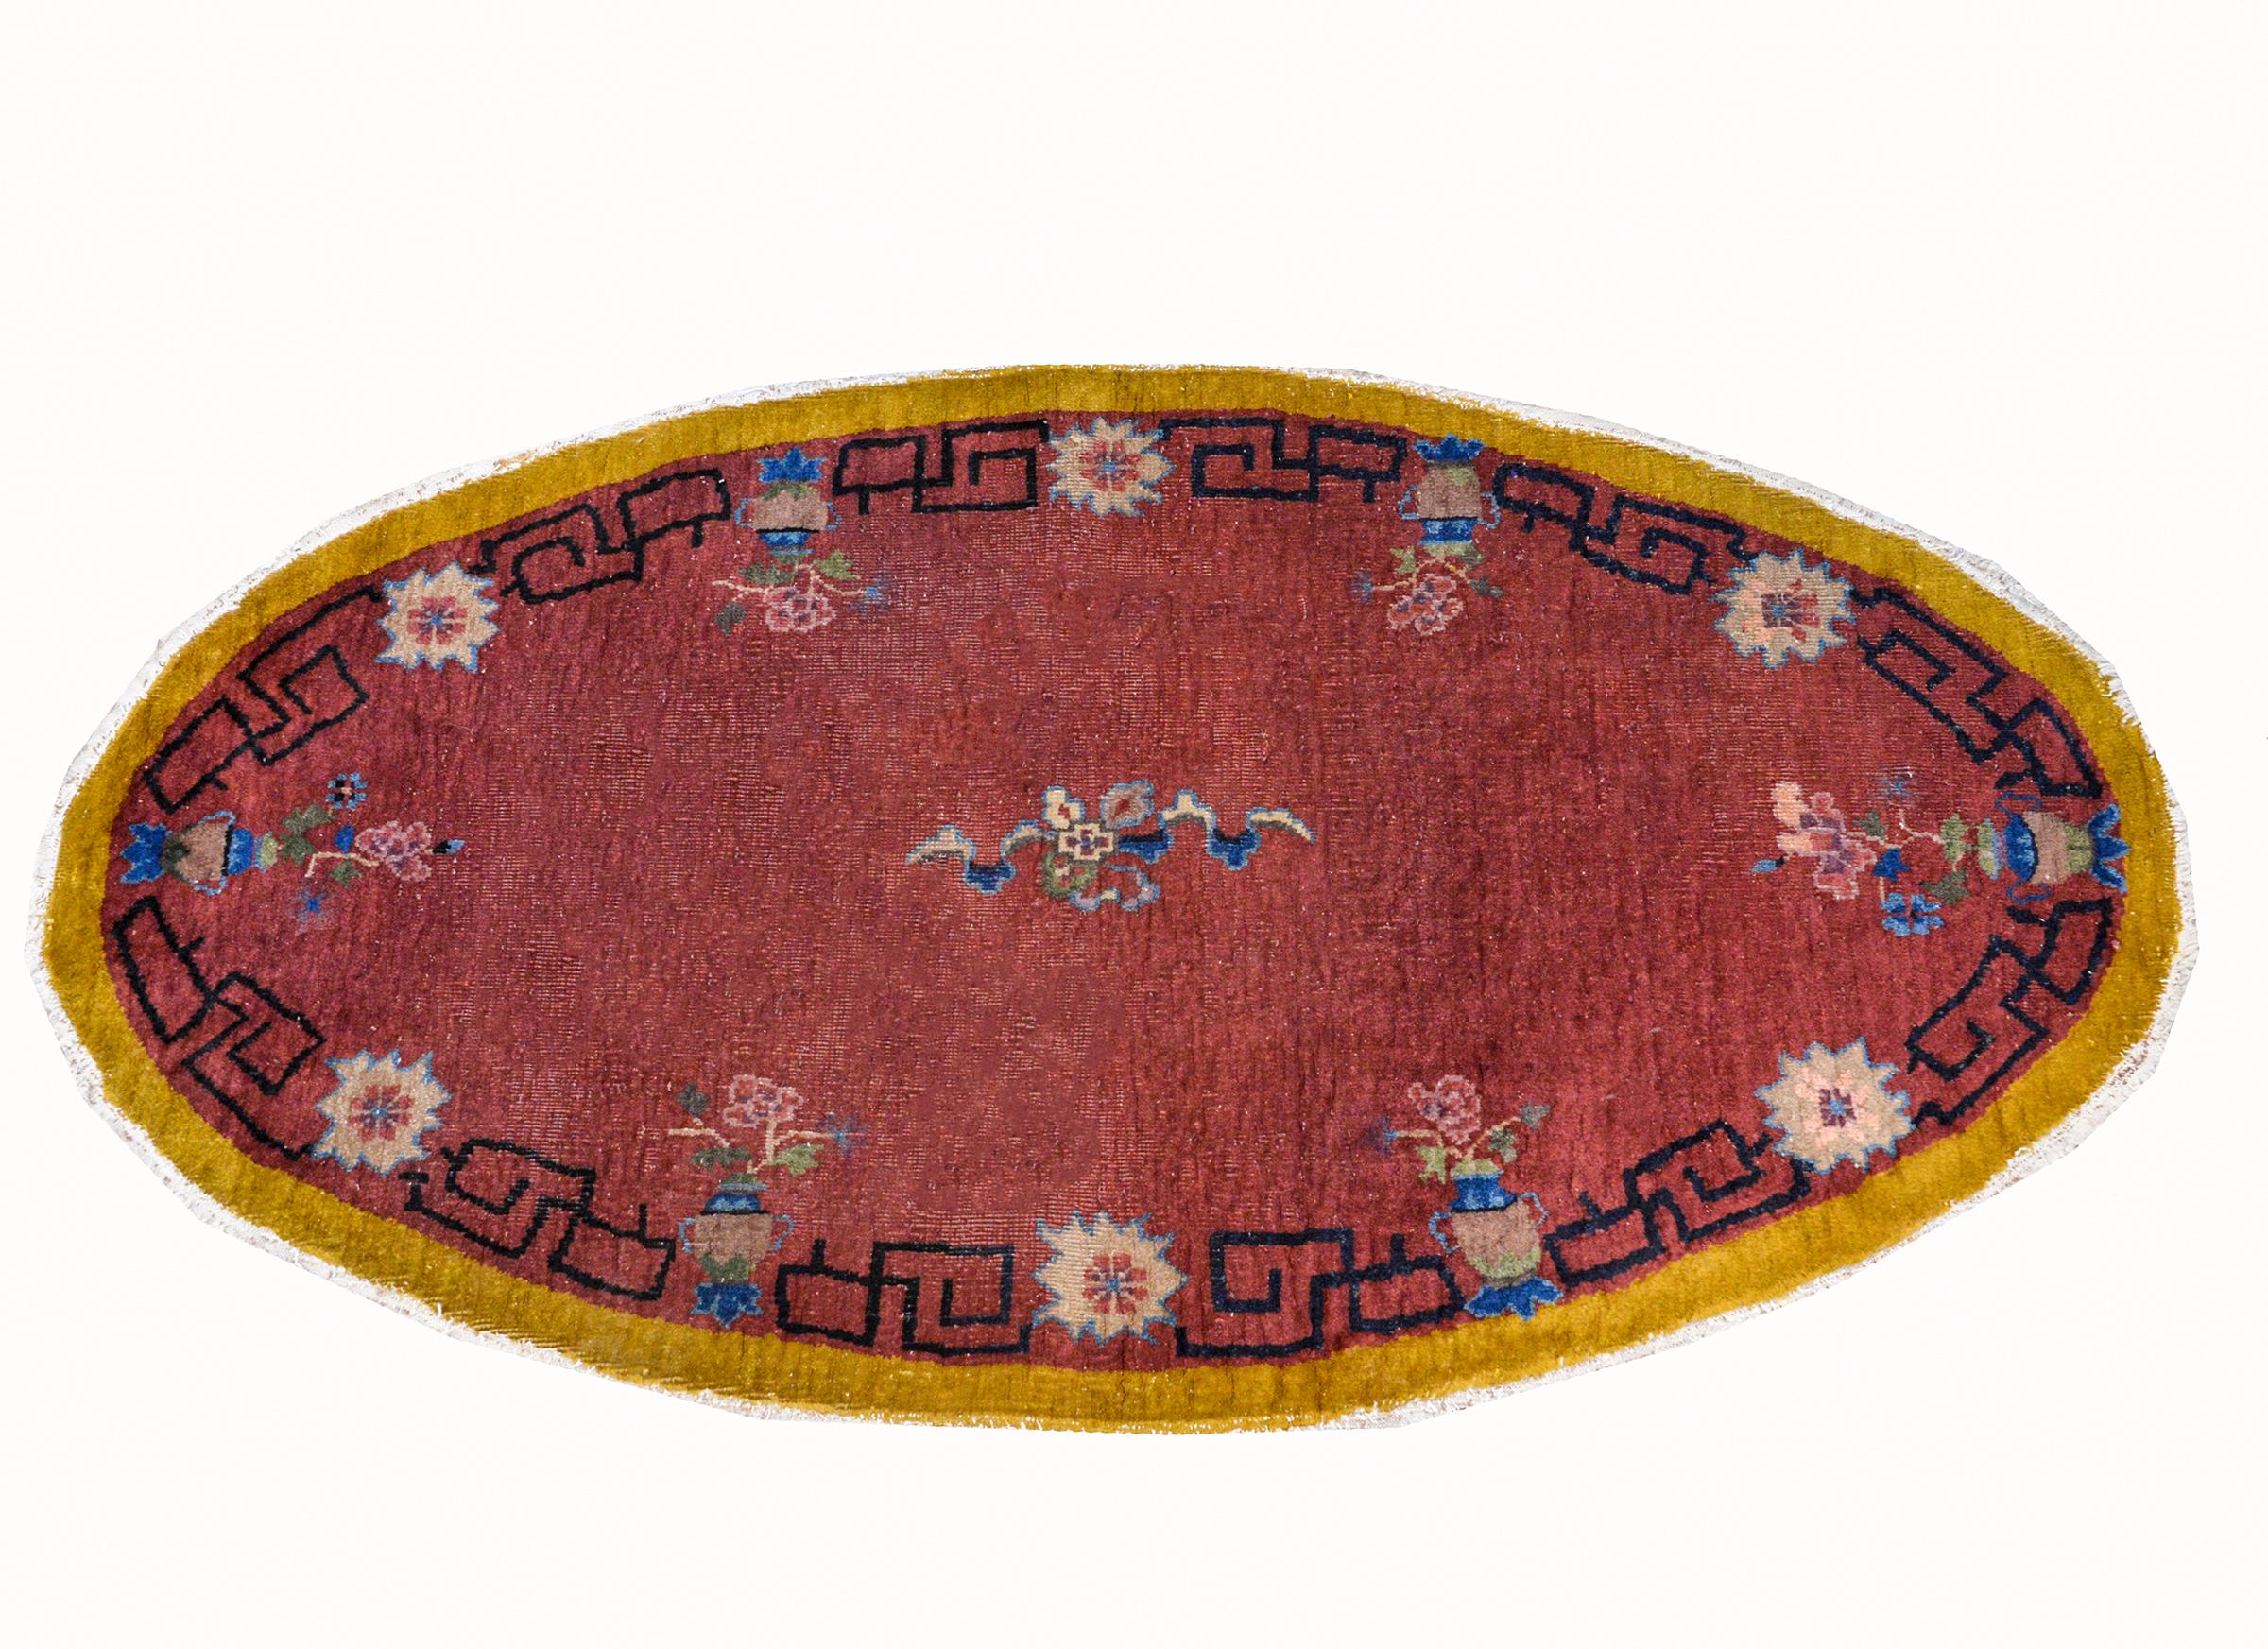 An unusual early 20th century oval Chinese Art Deco rug with a cranberry center, surrounded by a meandering motif and floral patterned border, with an outer gold stripe border.